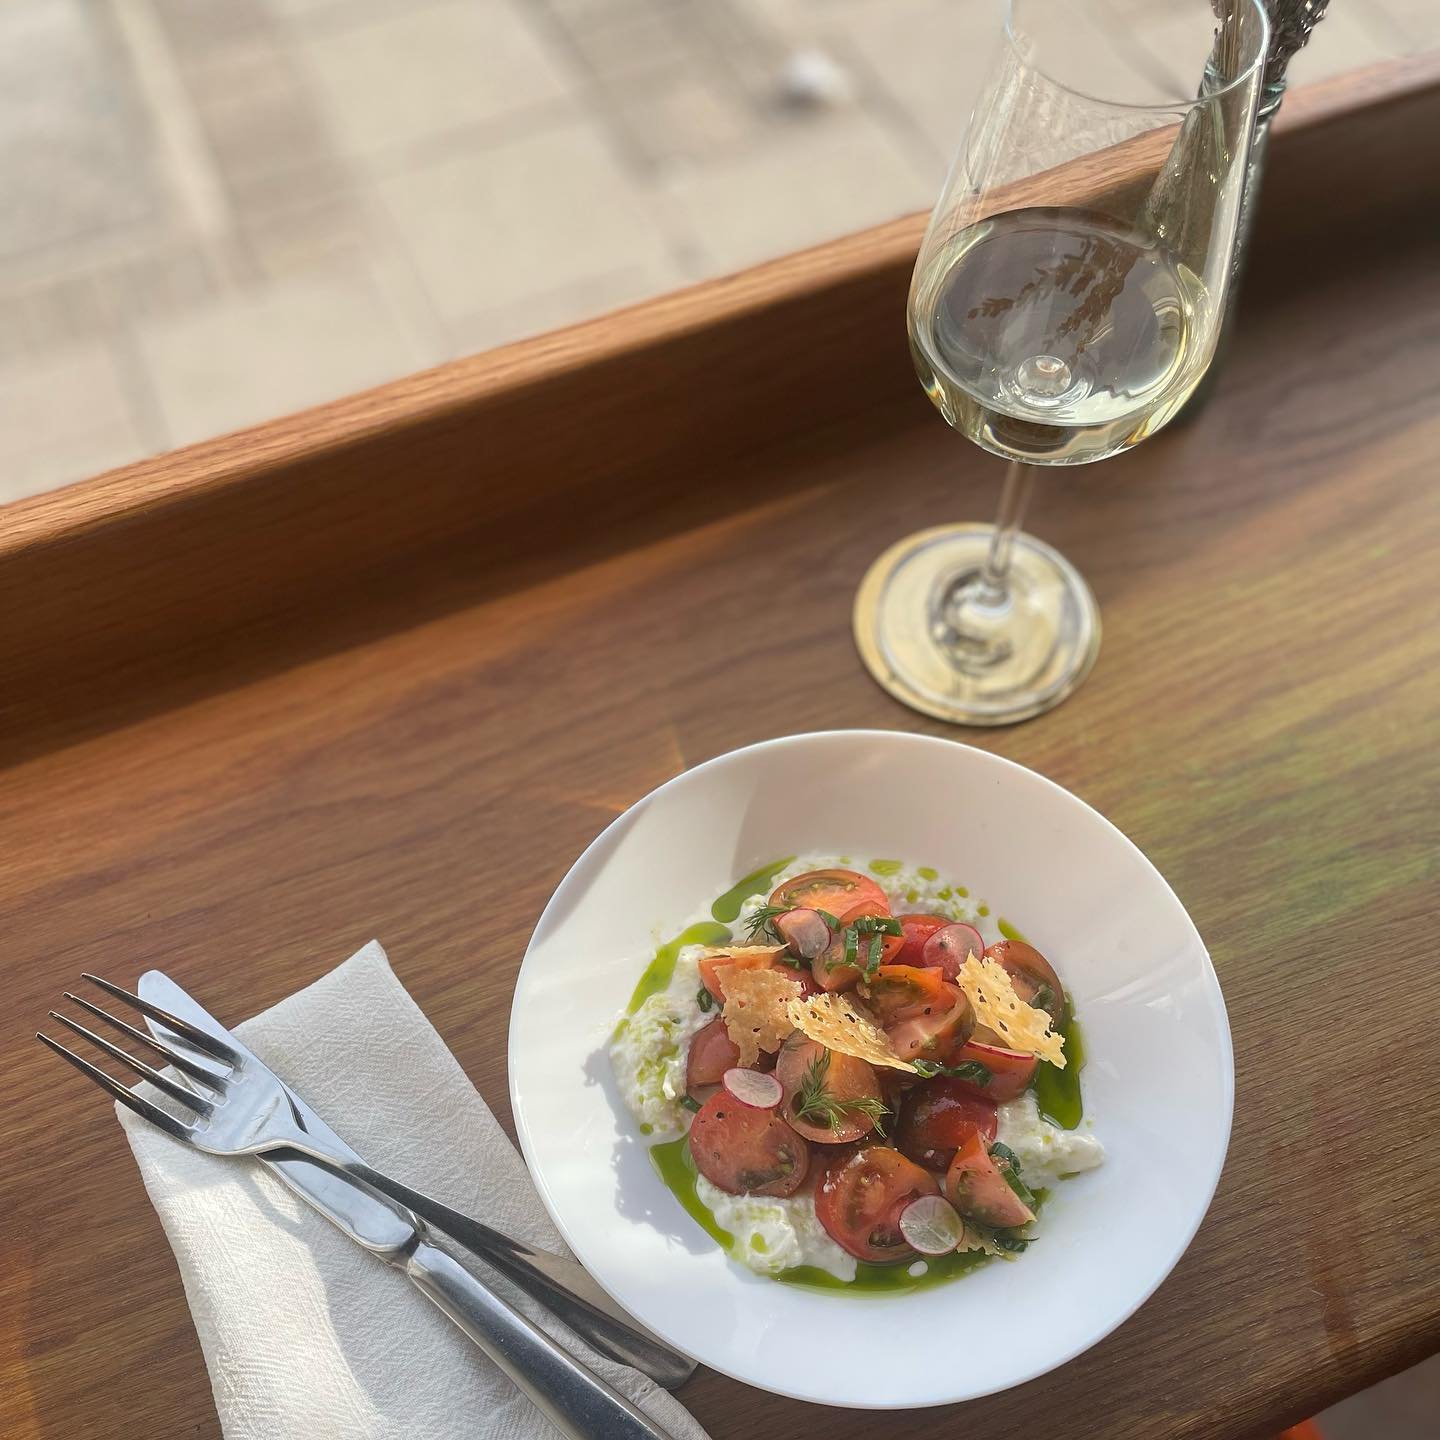 1st of May and all the summer produce is starting to appear! Come and join us for a sundowner and a mid-week bite. Swipe 👈 to see the menu&hellip;

(Aperitivo pricing until 7, kitchen until 9.15)